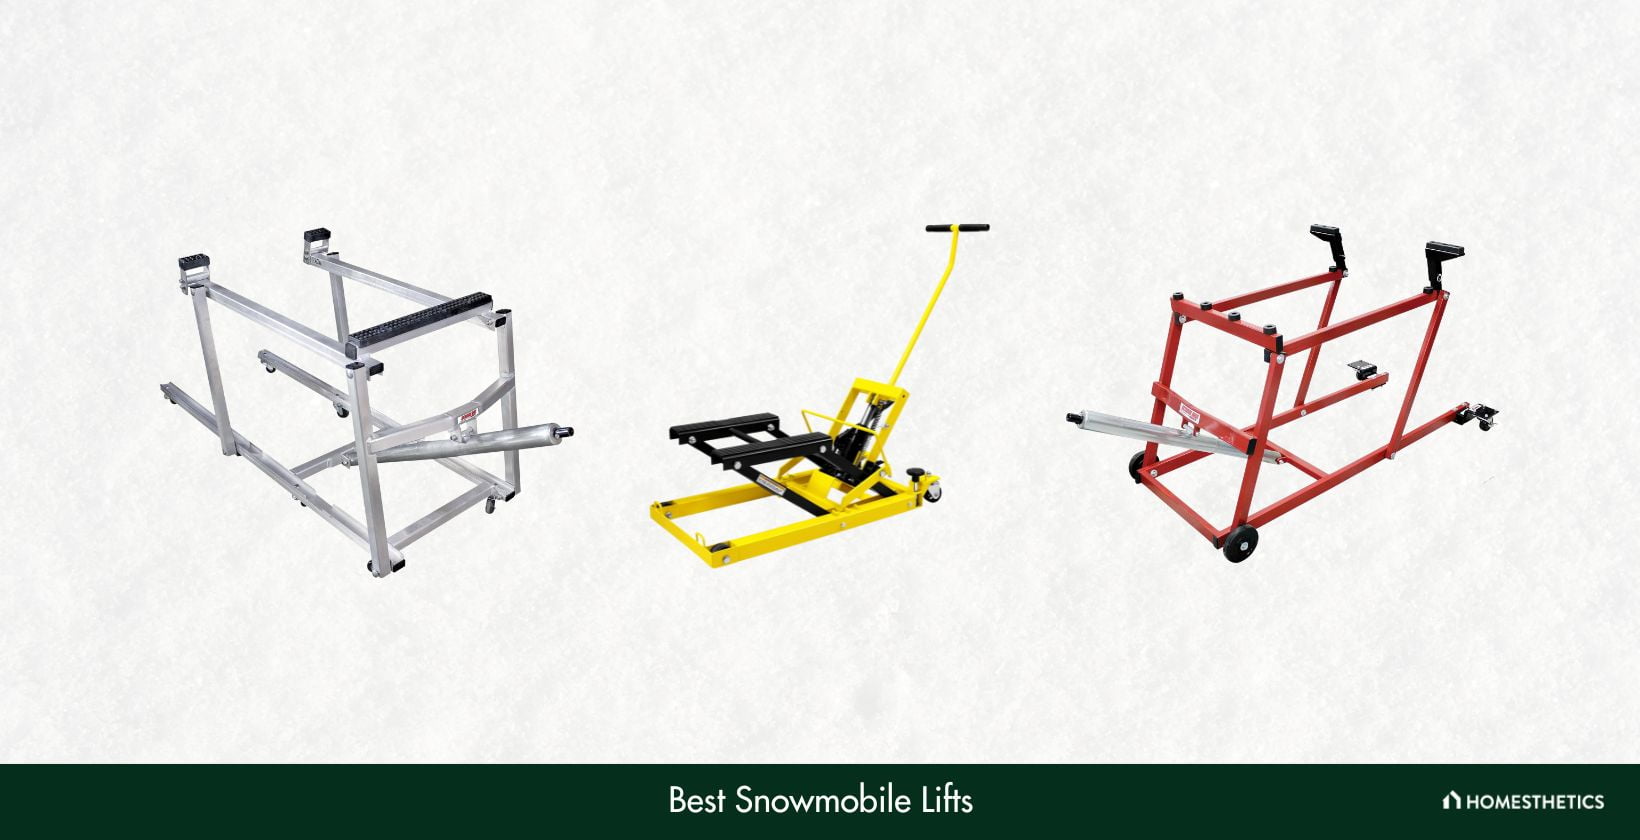 Best Snowmobile Lifts